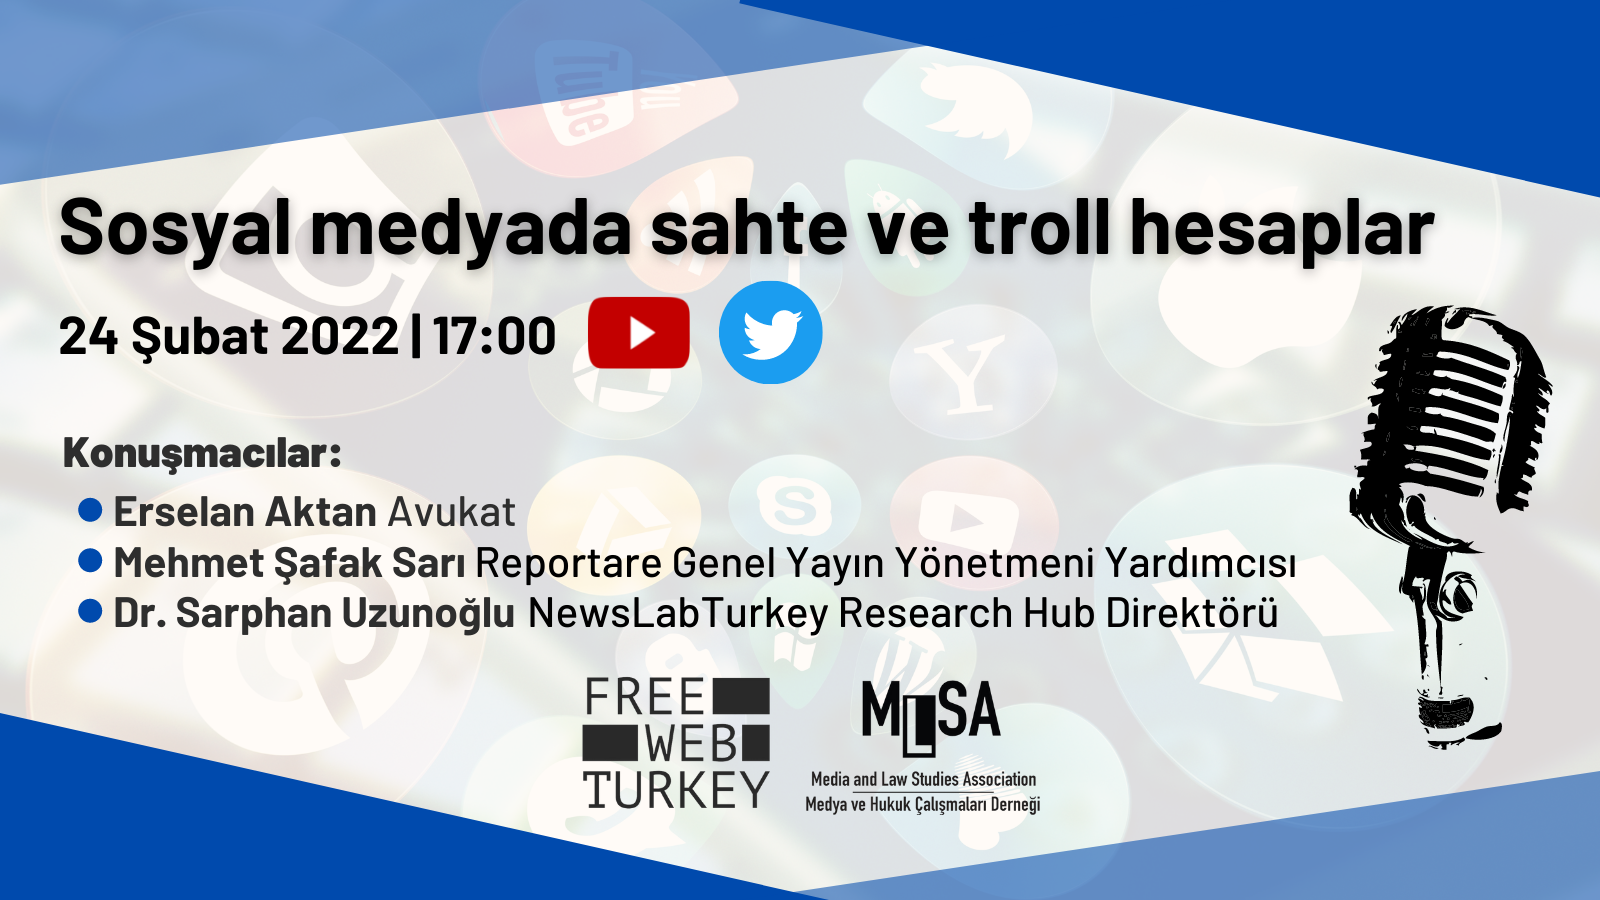 We held our panel on “Fake and troll accounts on social media”